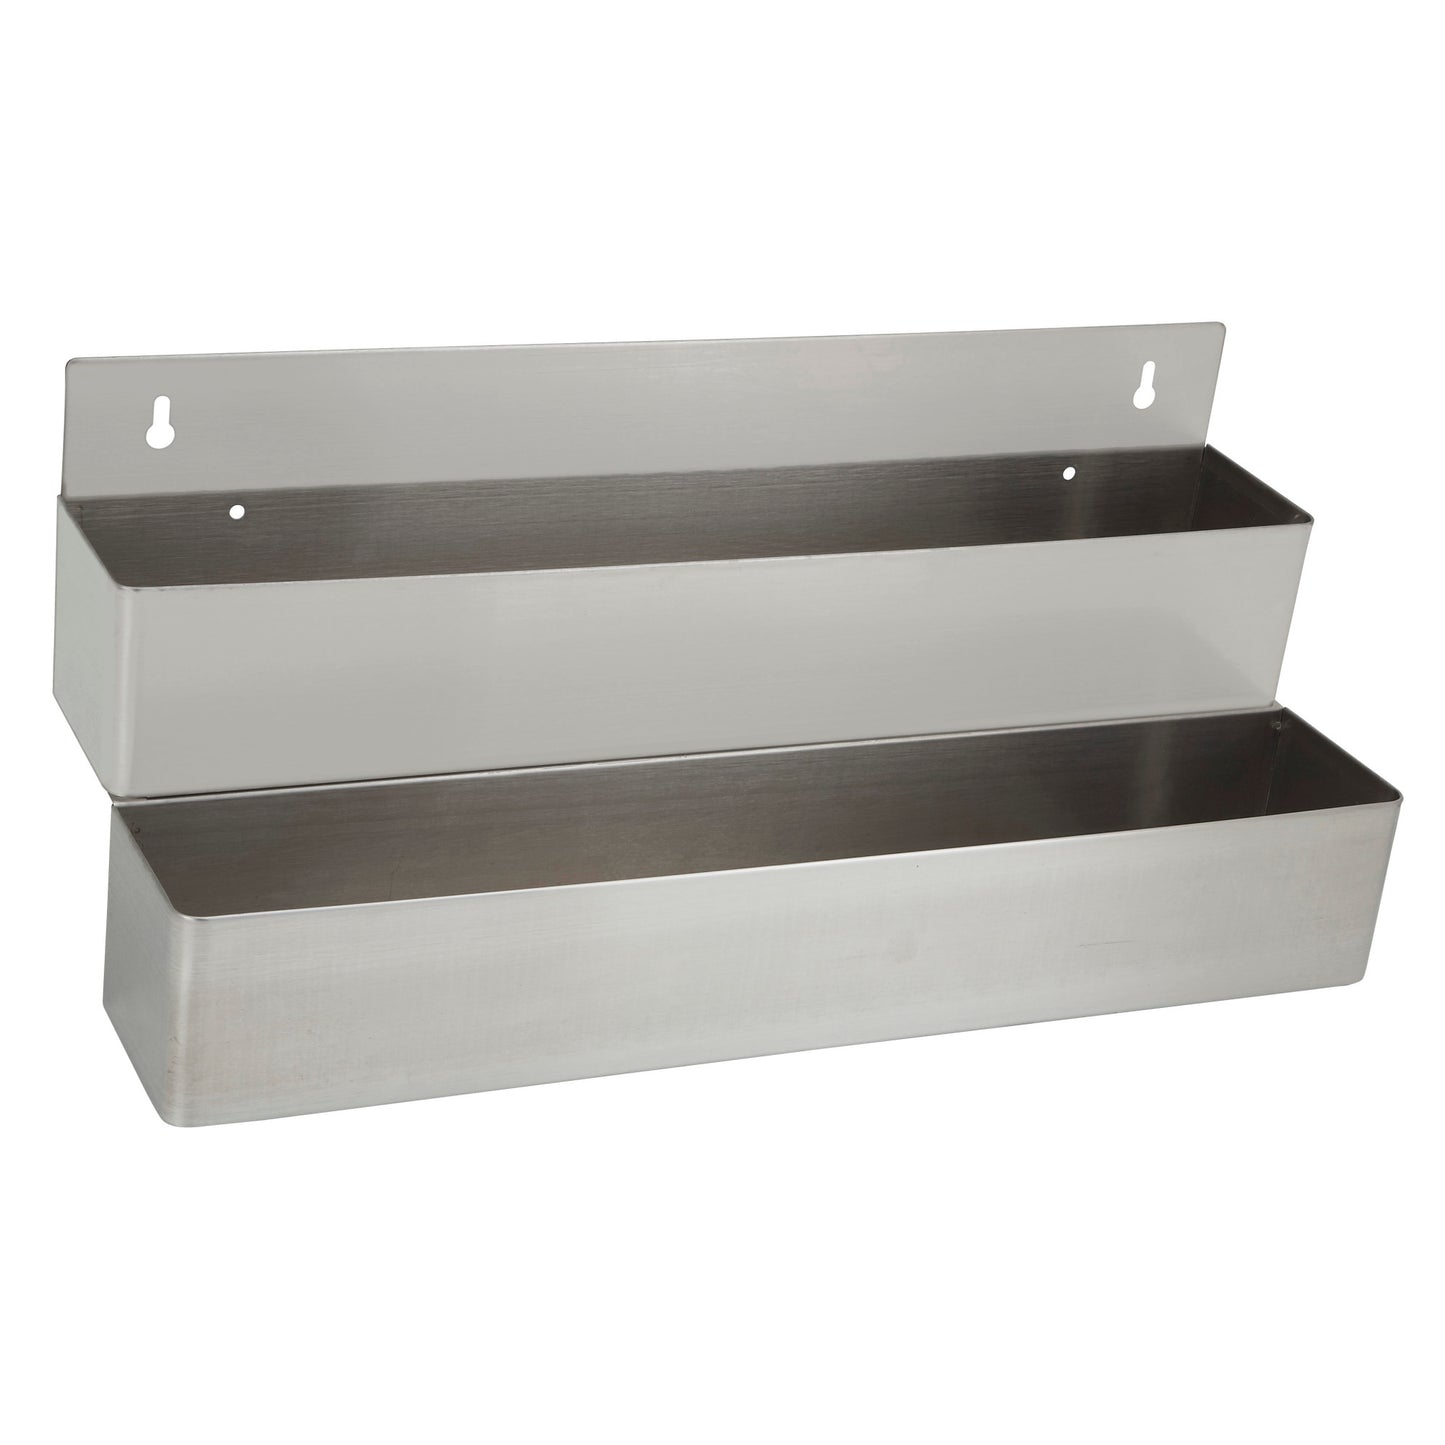 SPR-42D - Double Bar Speed Rail, Stainless Steel - 42"